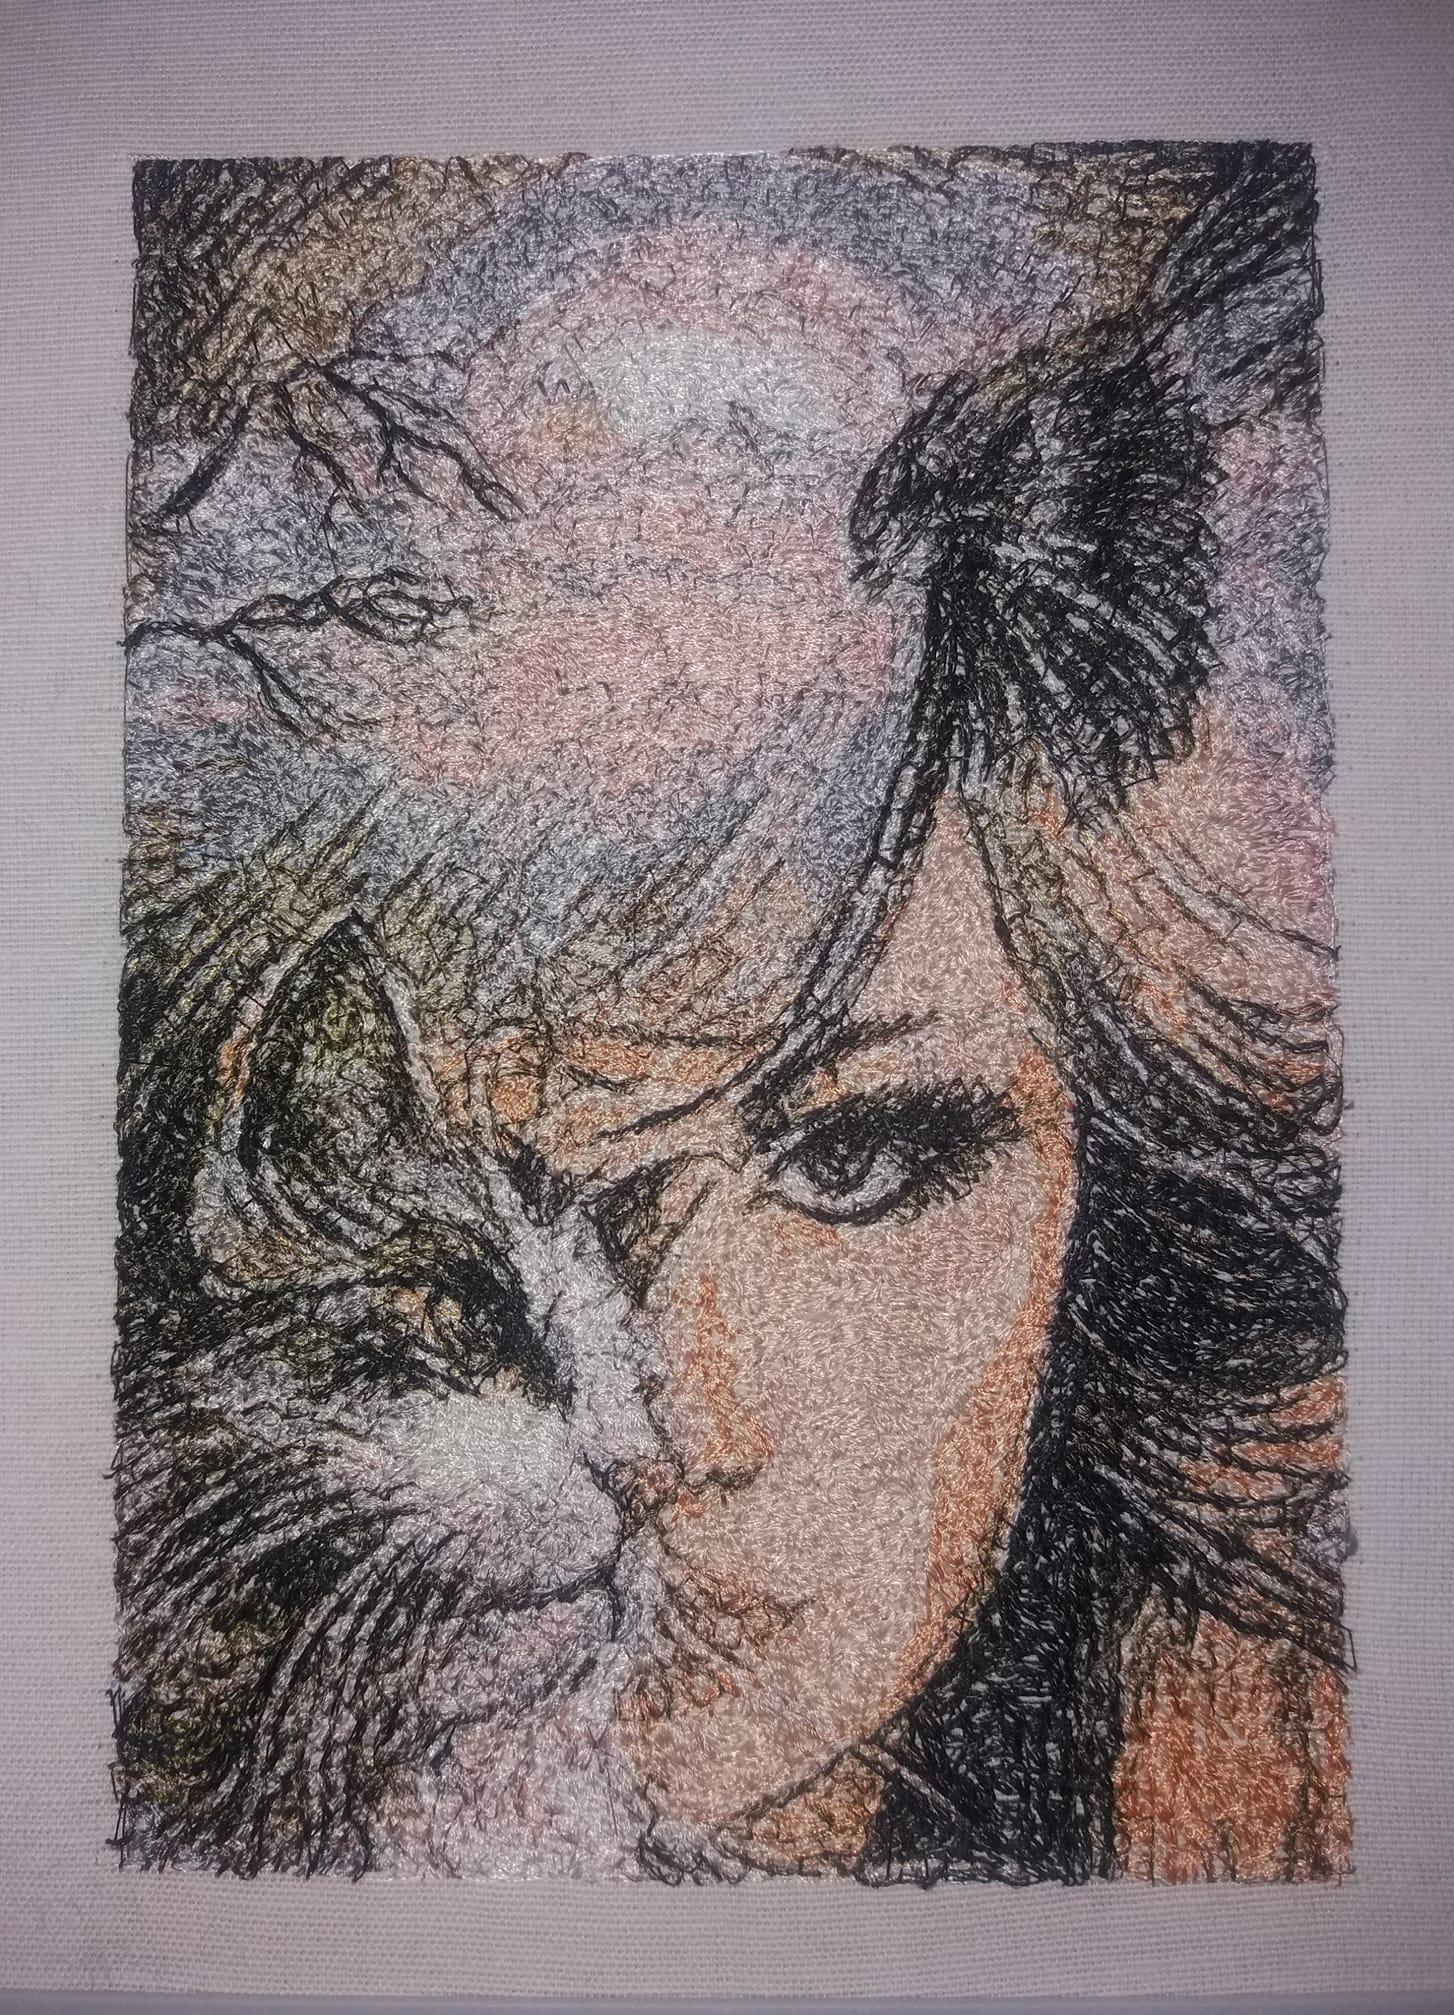 Embroidered picture with Woman and cat design